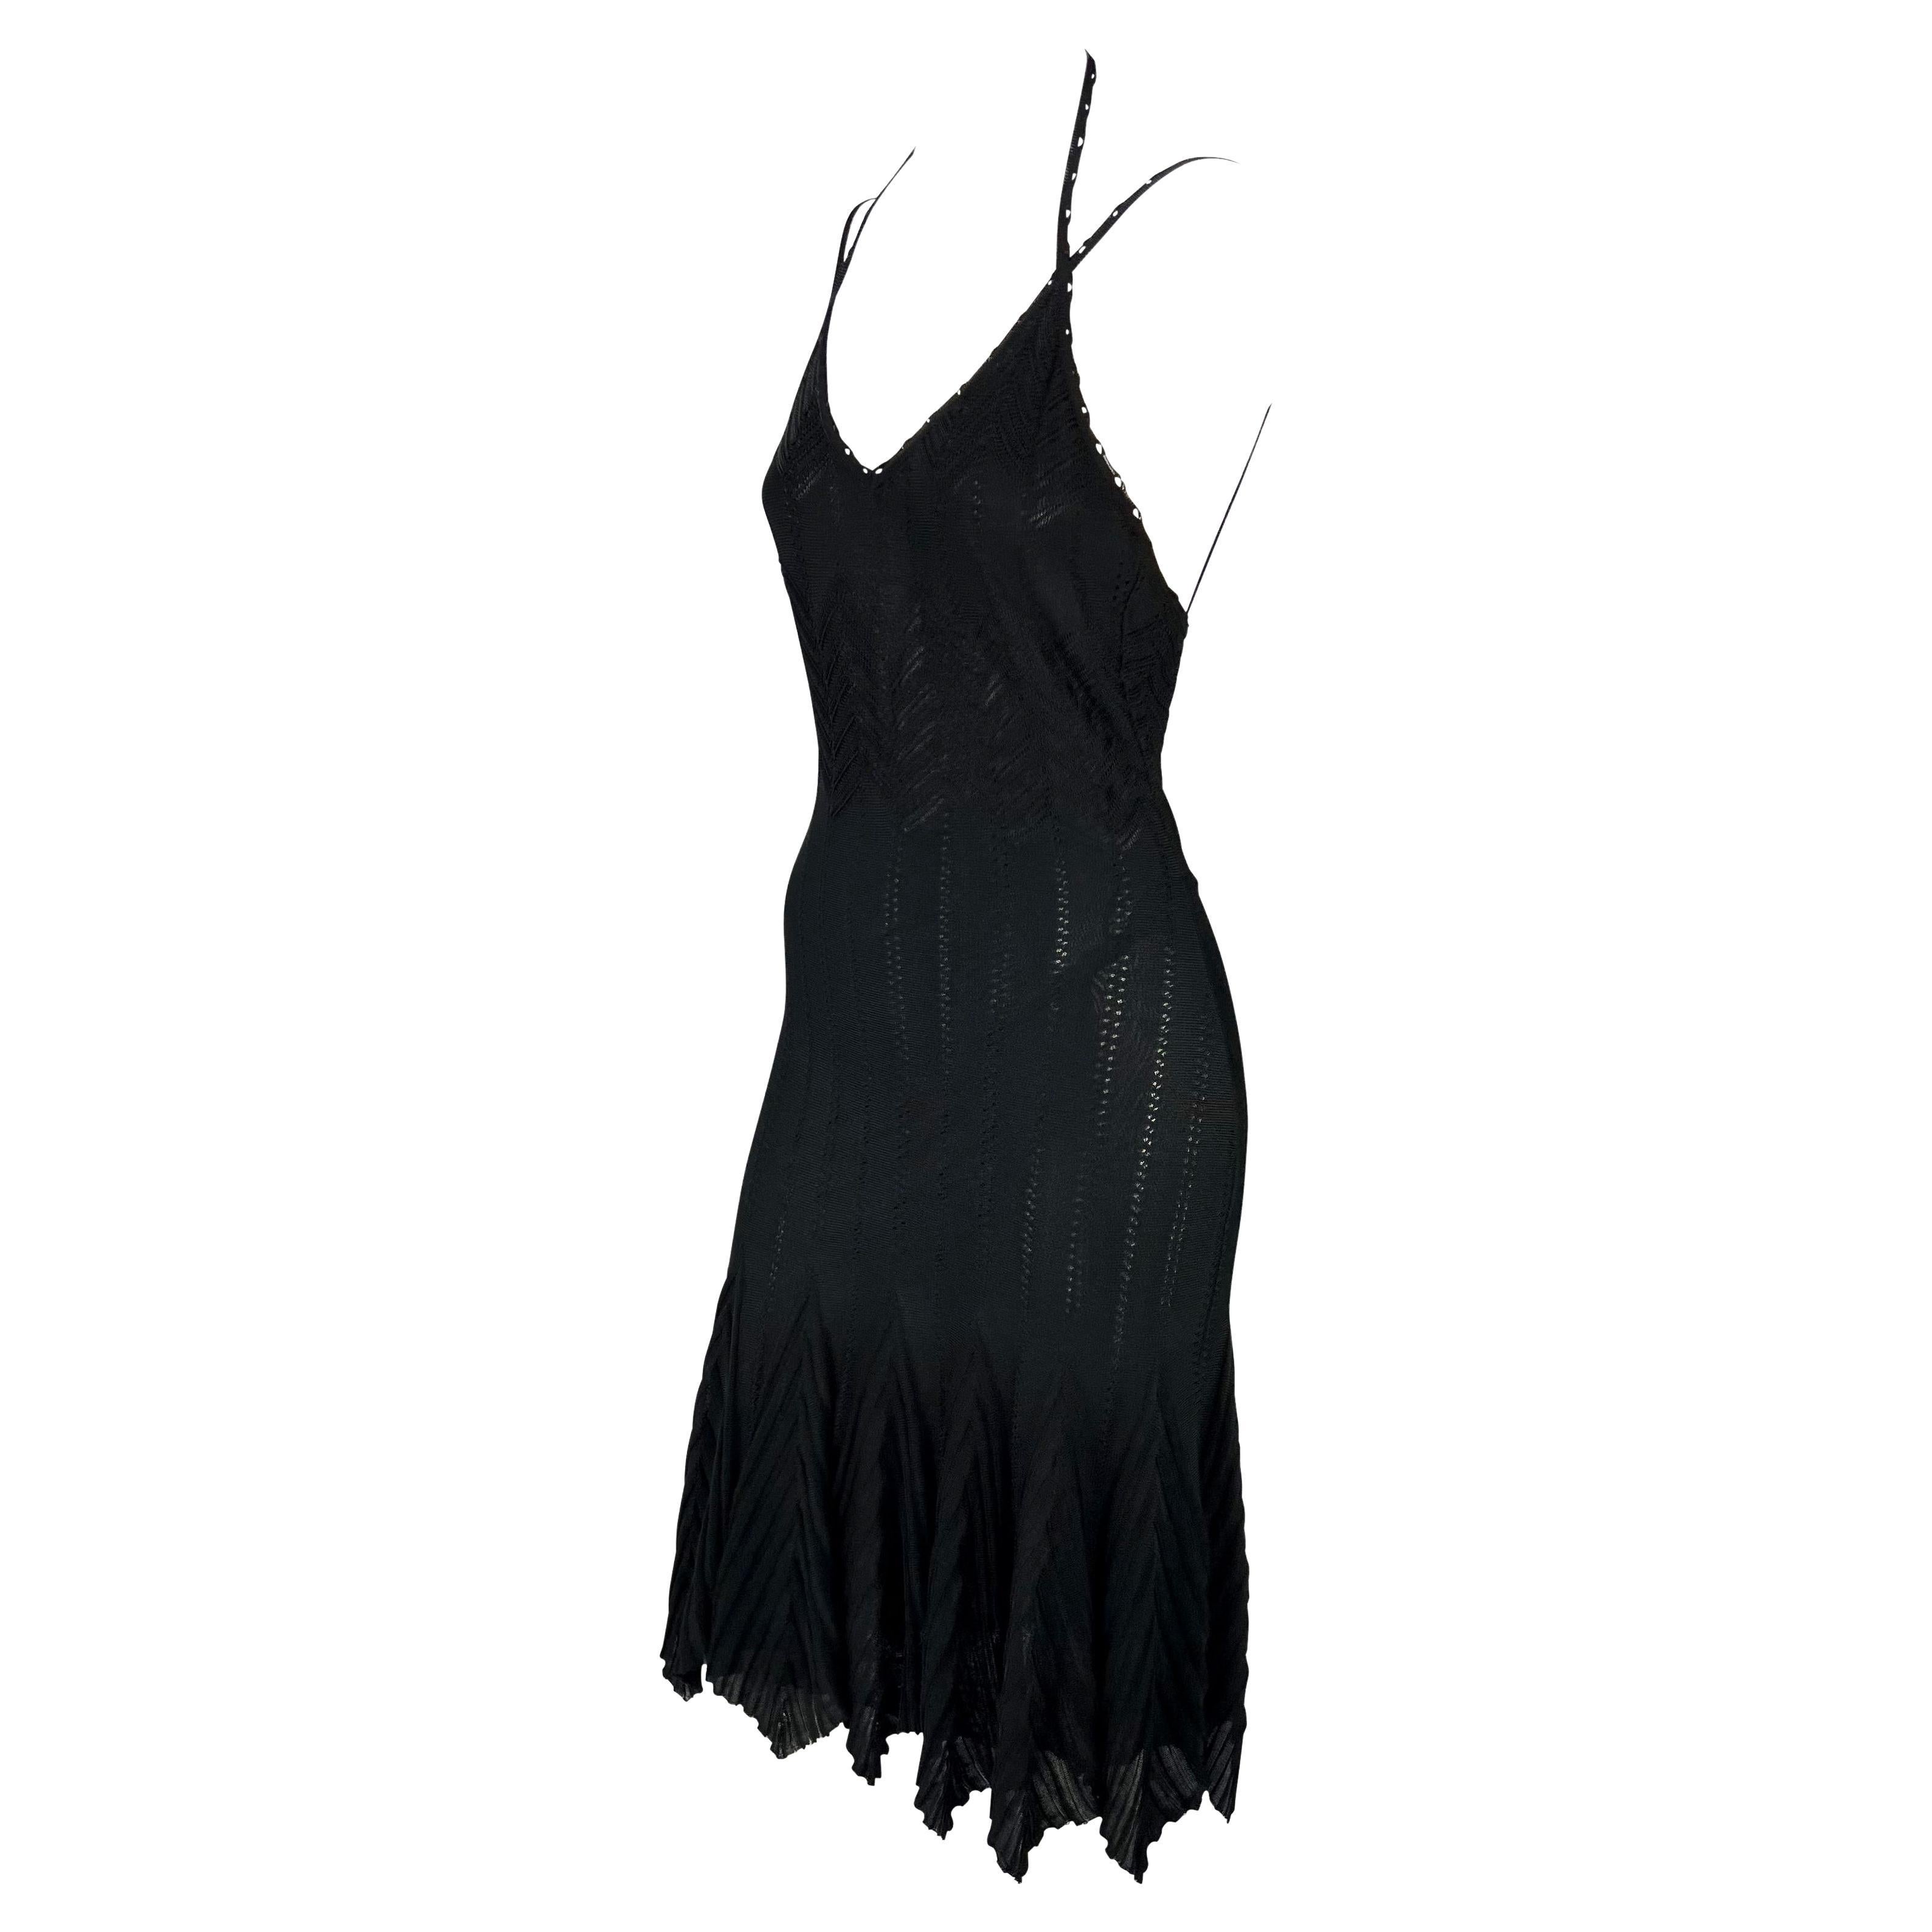 Presenting a black knit Christian Dior Boutique dress, designed by John Galliano. From the Spring/Summer 2006 collection, this beautiful stretchy dress features a sheer interior slip with a knit exterior constructed of varying knit patterns. This